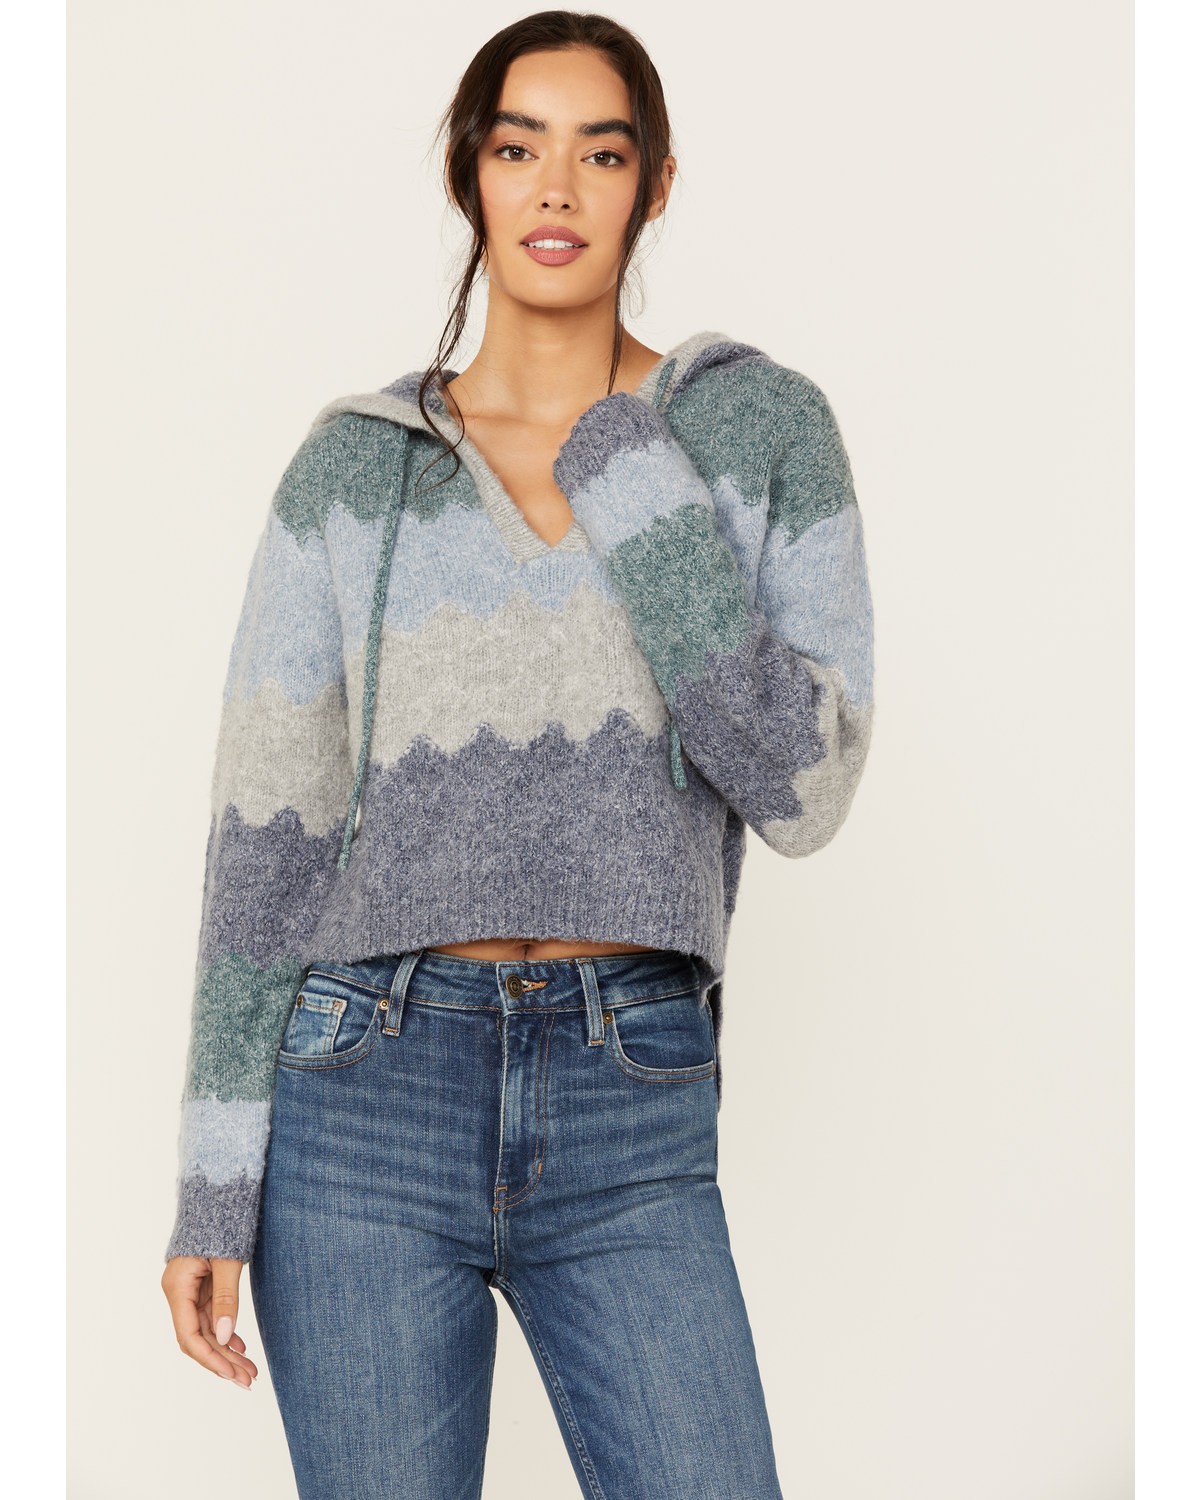 Cleo + Wolf Women's Ombre Hooded Sweater